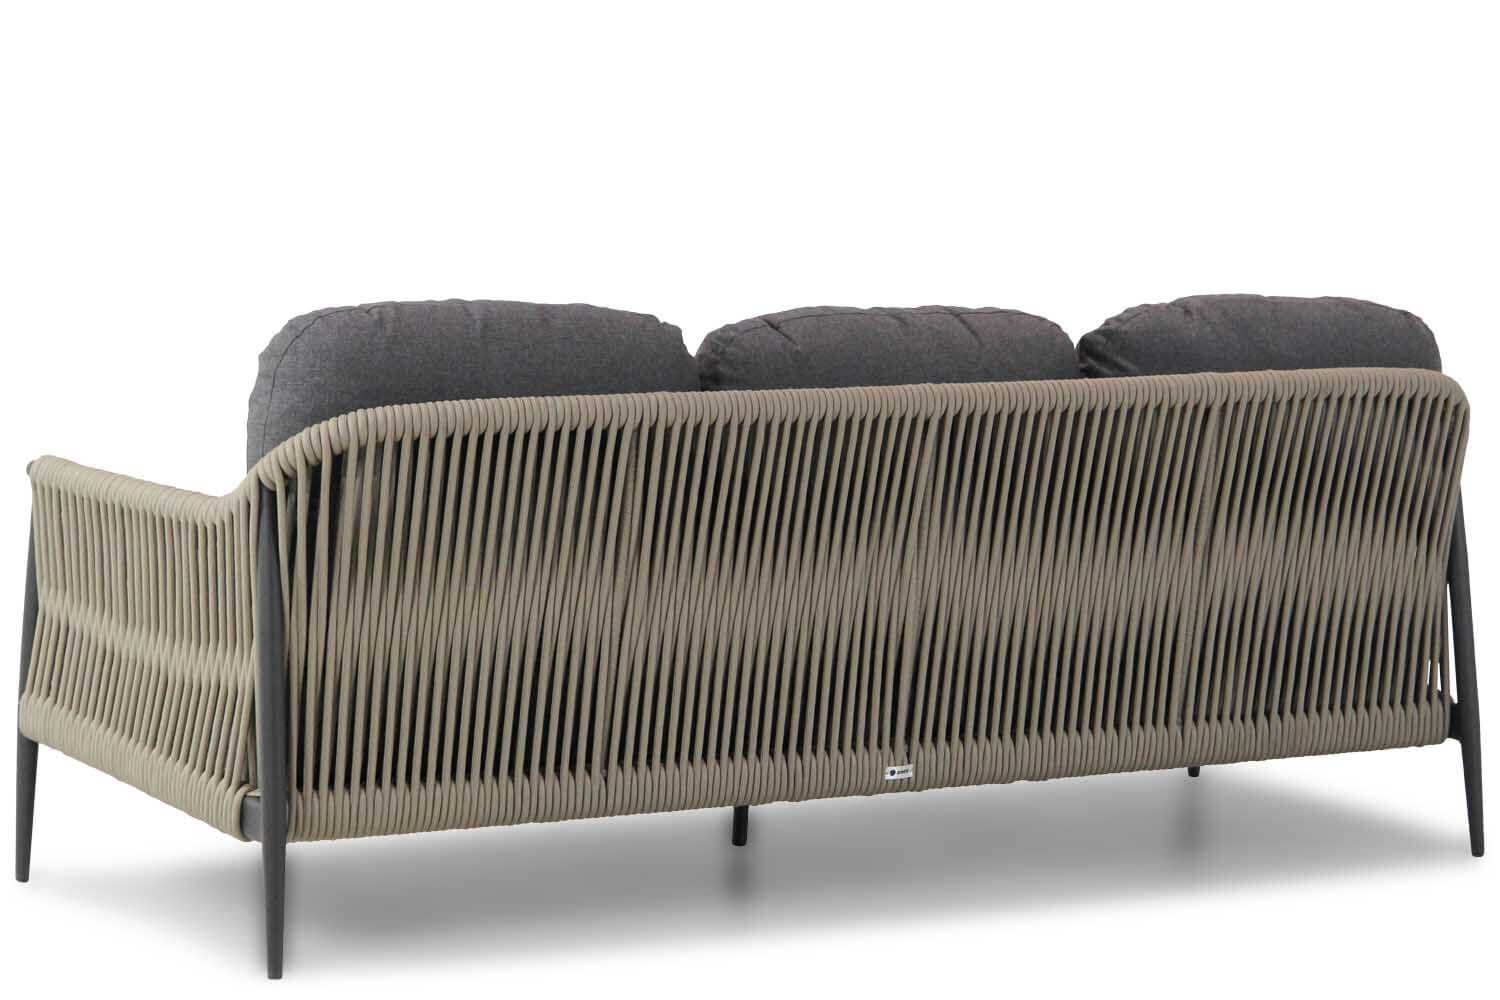 Coco Lucia/Pacific 60 cm stoel-bank loungeset 4-delig